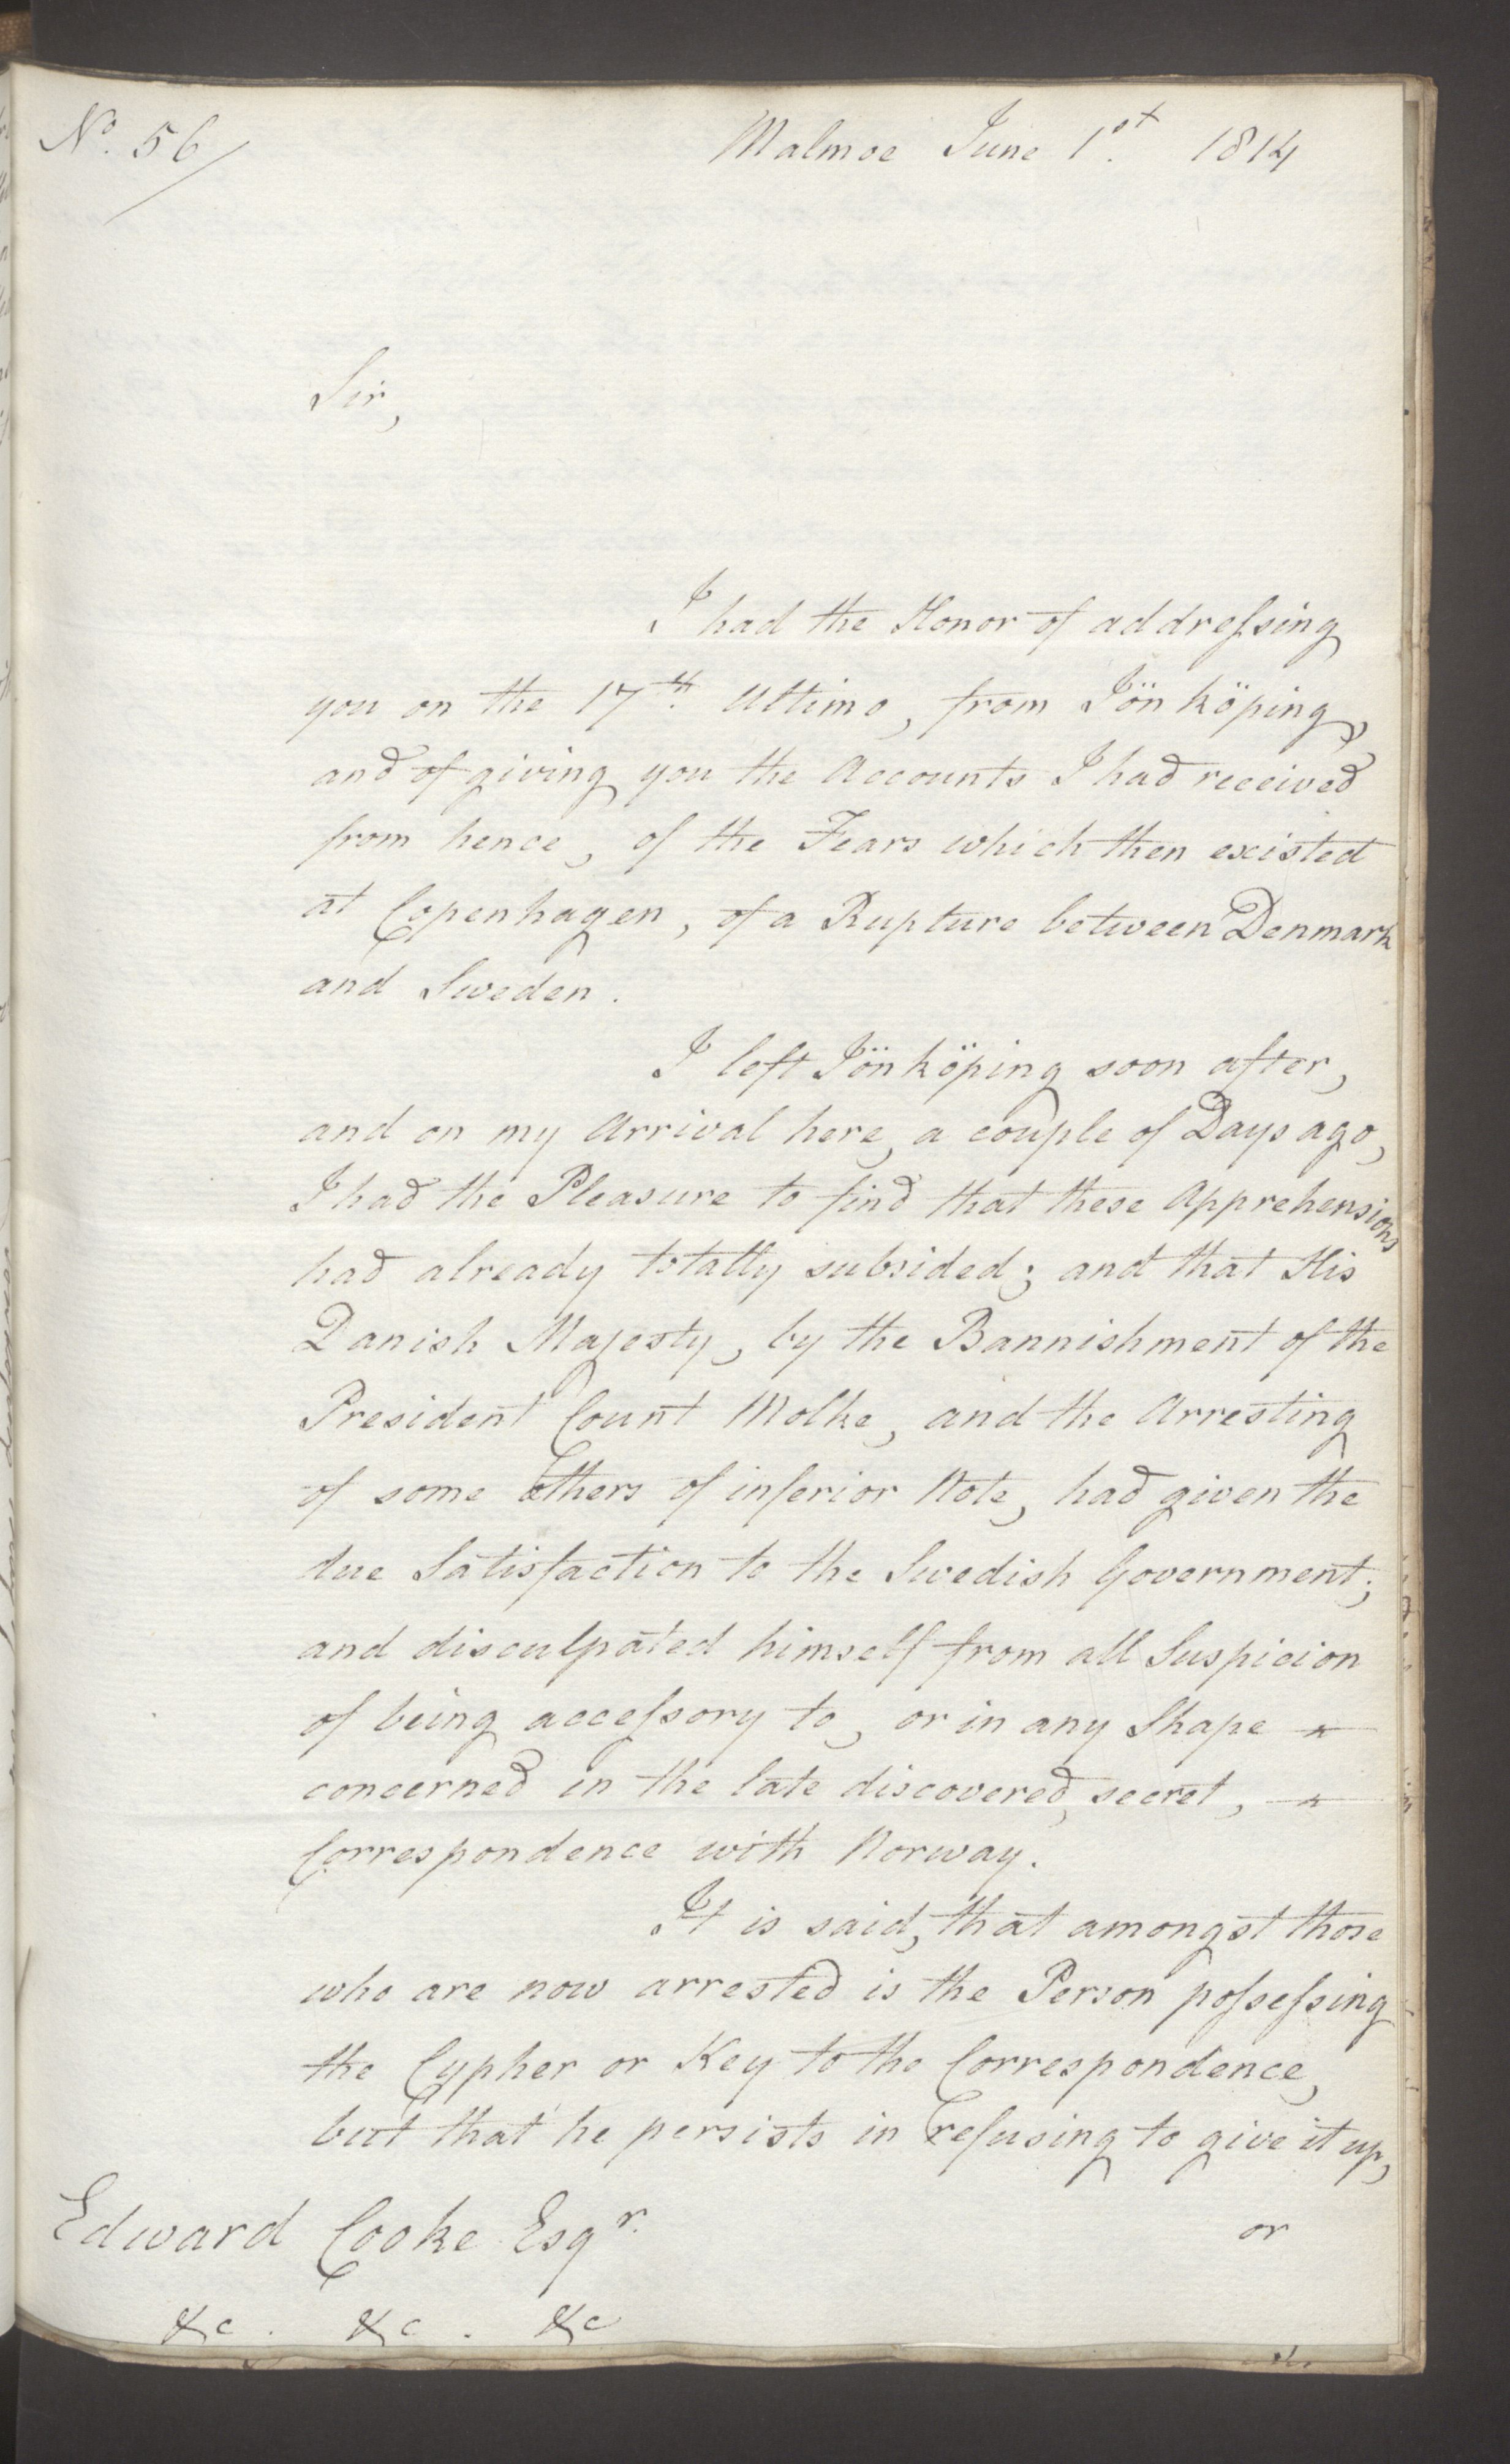 Foreign Office*, UKA/-/FO 38/16: Sir C. Gordon. Reports from Malmö, Jonkoping, and Helsingborg, 1814, p. 57